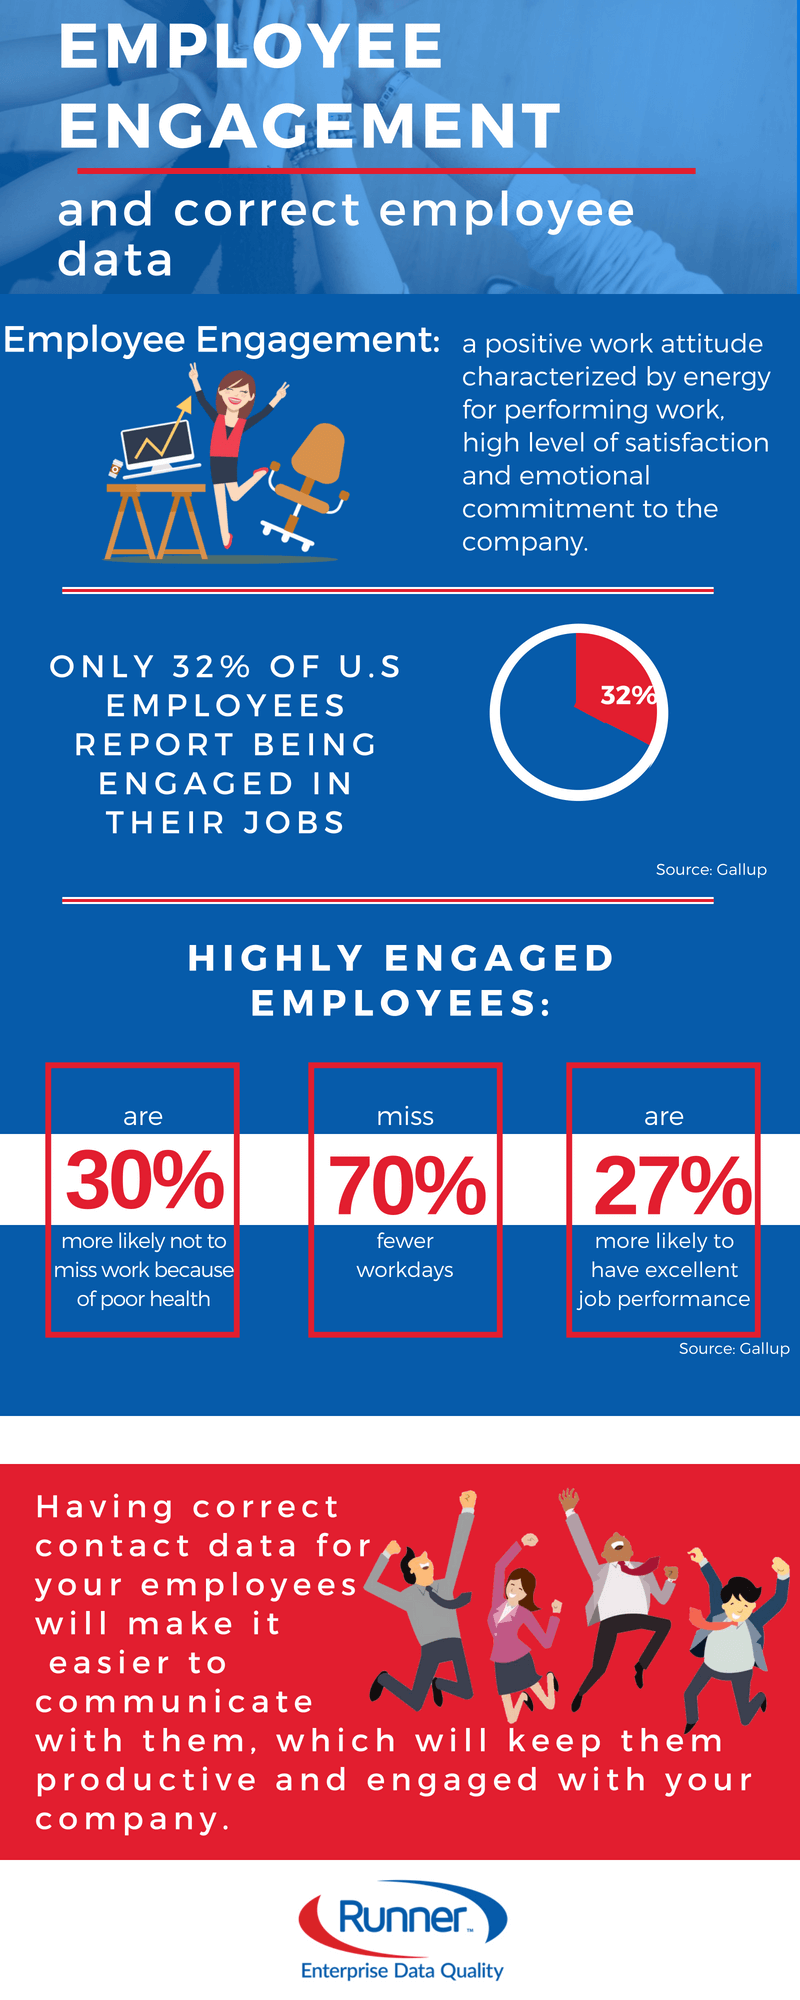 There are plenty of ways to improve employee engagement, and having the correct employee data is one of them.